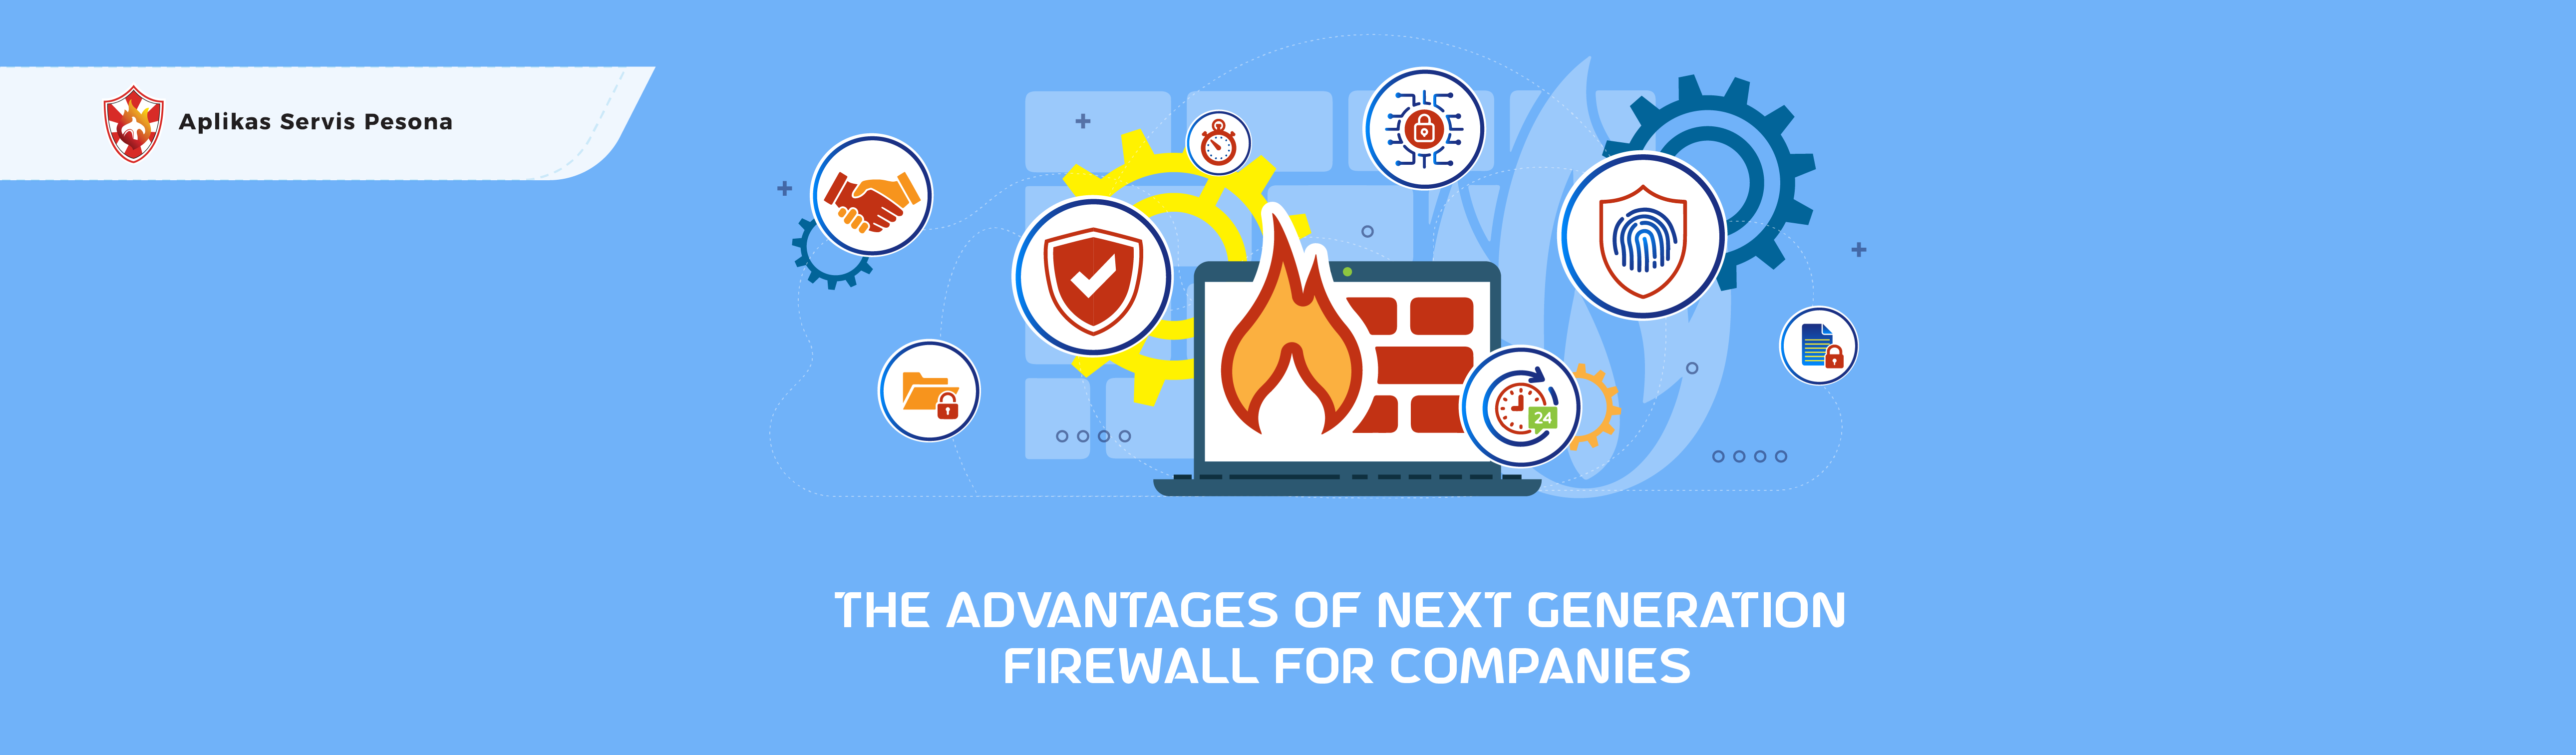 Benefits of Using Next-Generation Firewall for Company